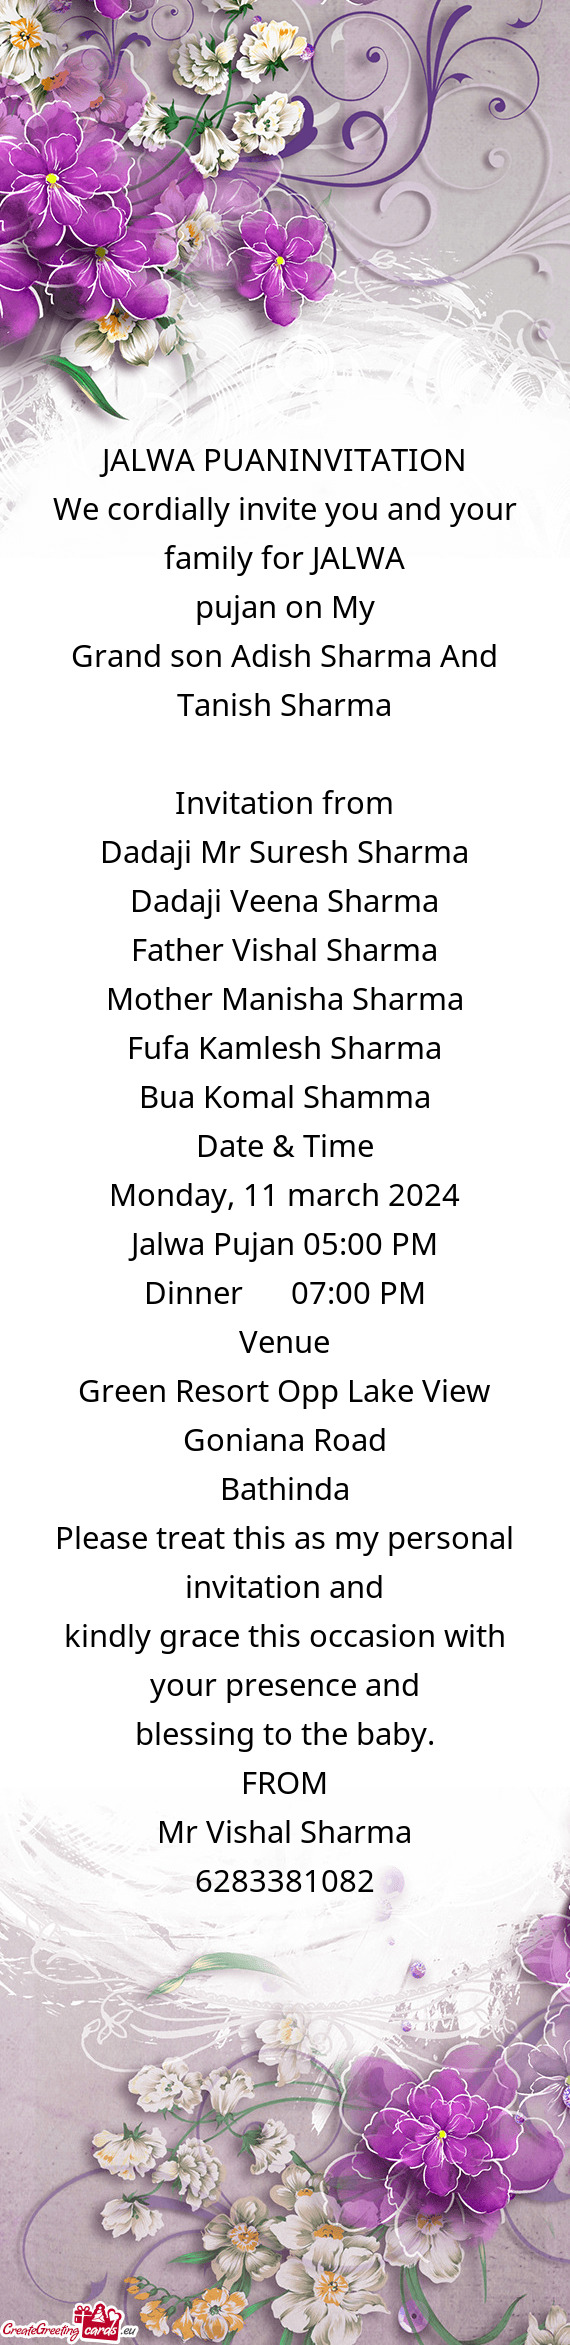 We cordially invite you and your family for JALWA